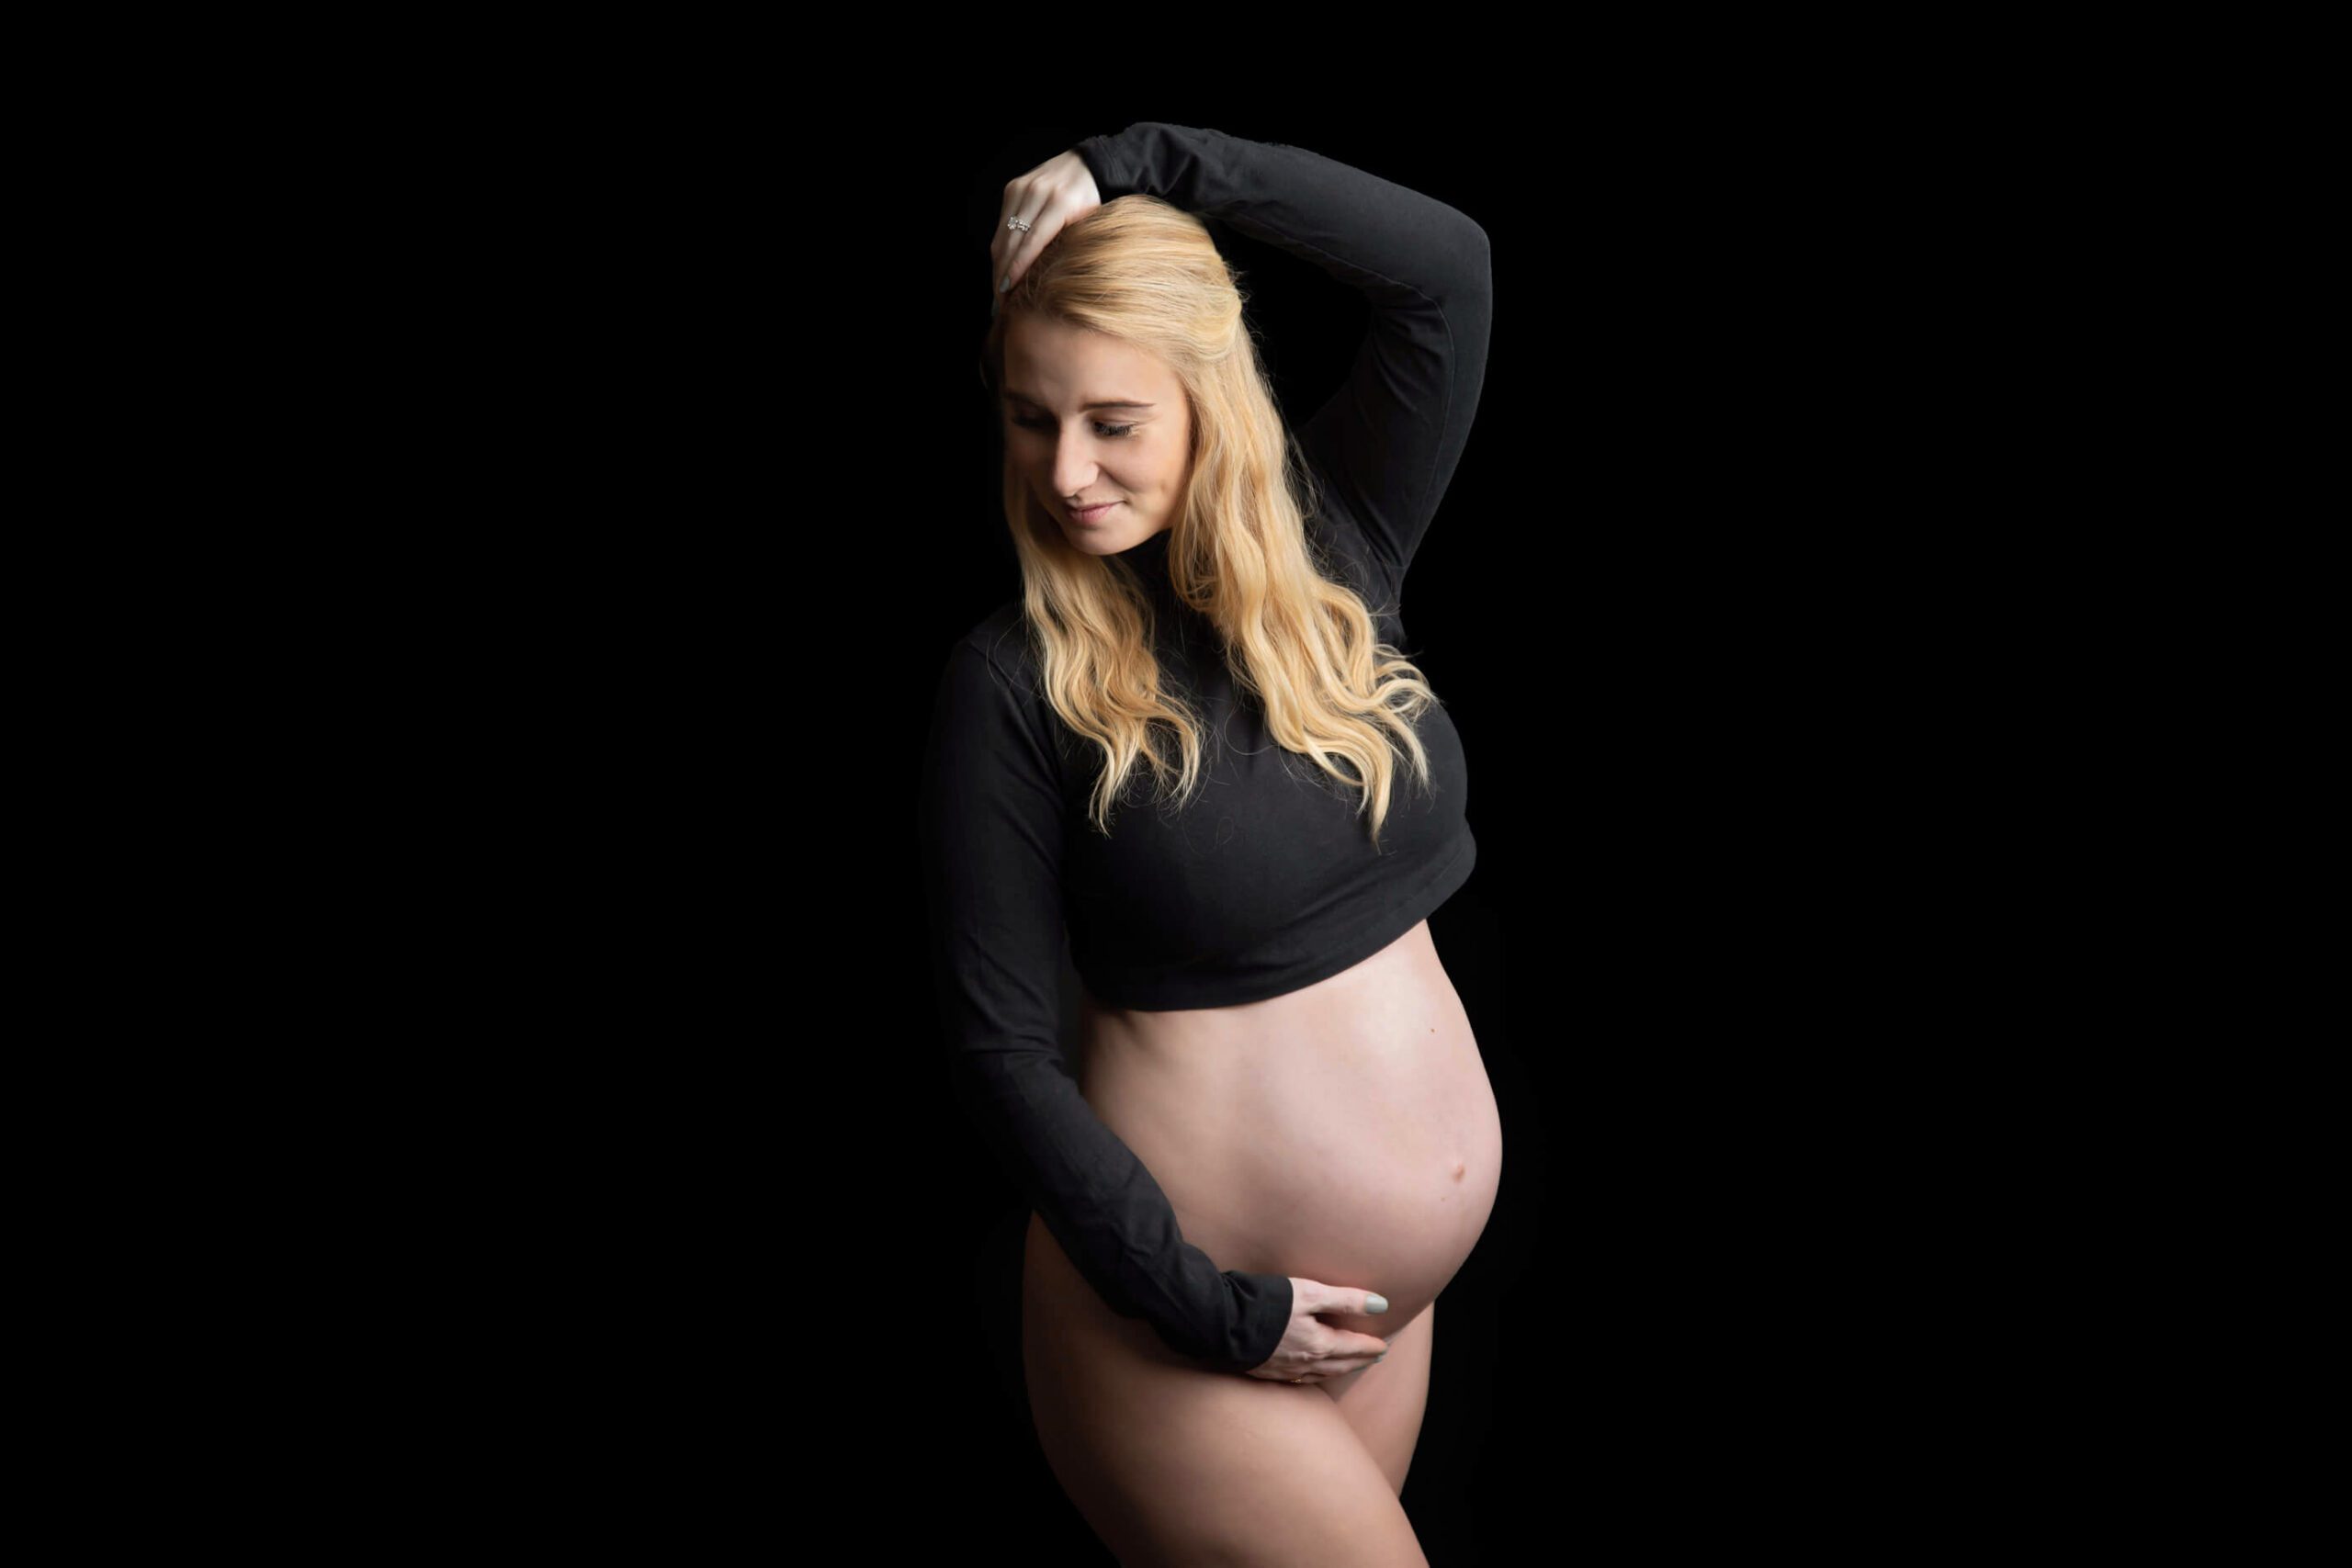 All black Burlington Ontario maternity photography mom holding her arm above her head smiling